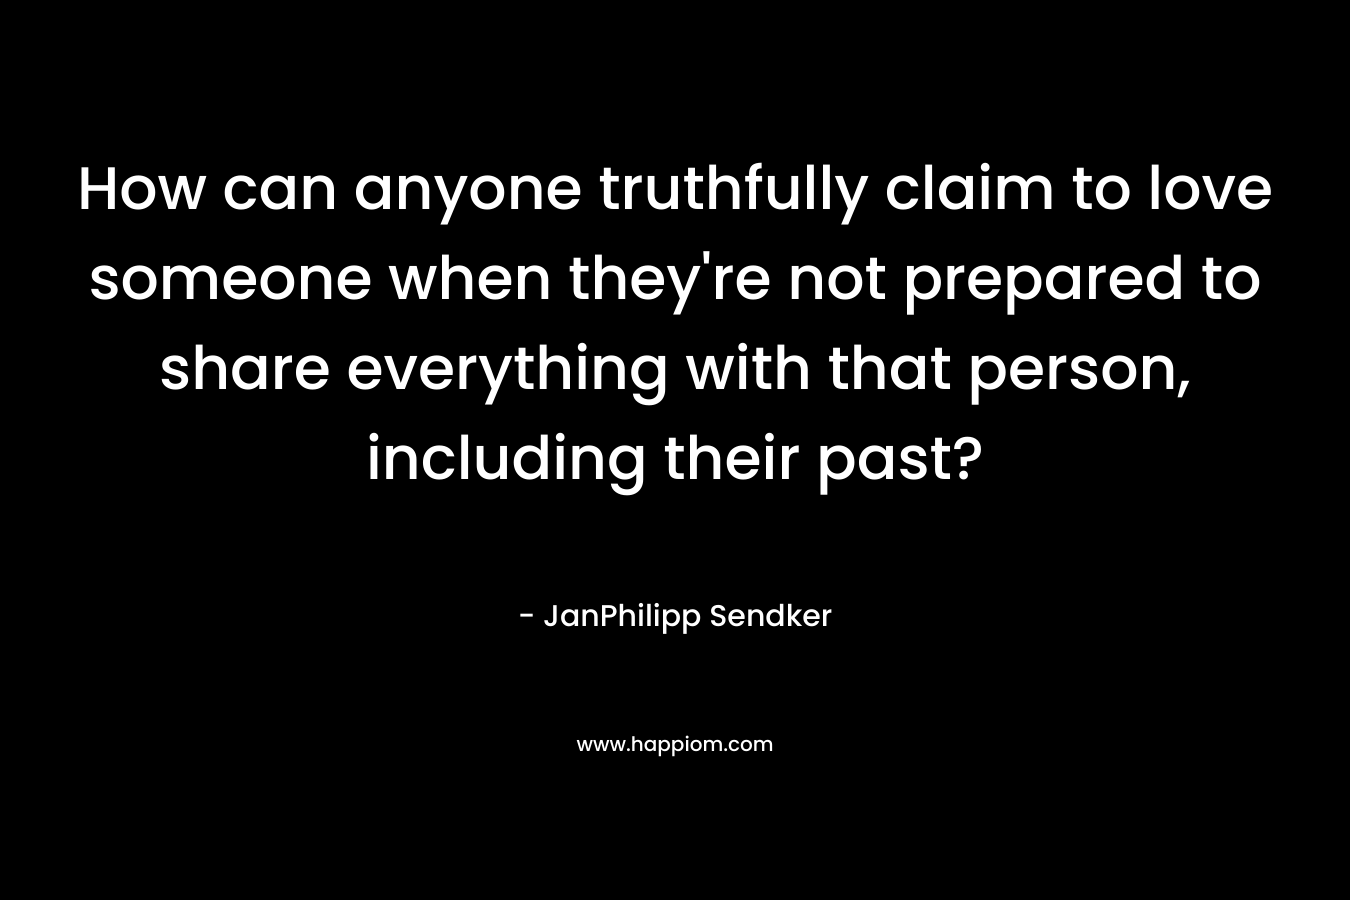 How can anyone truthfully claim to love someone when they’re not prepared to share everything with that person, including their past? – JanPhilipp Sendker